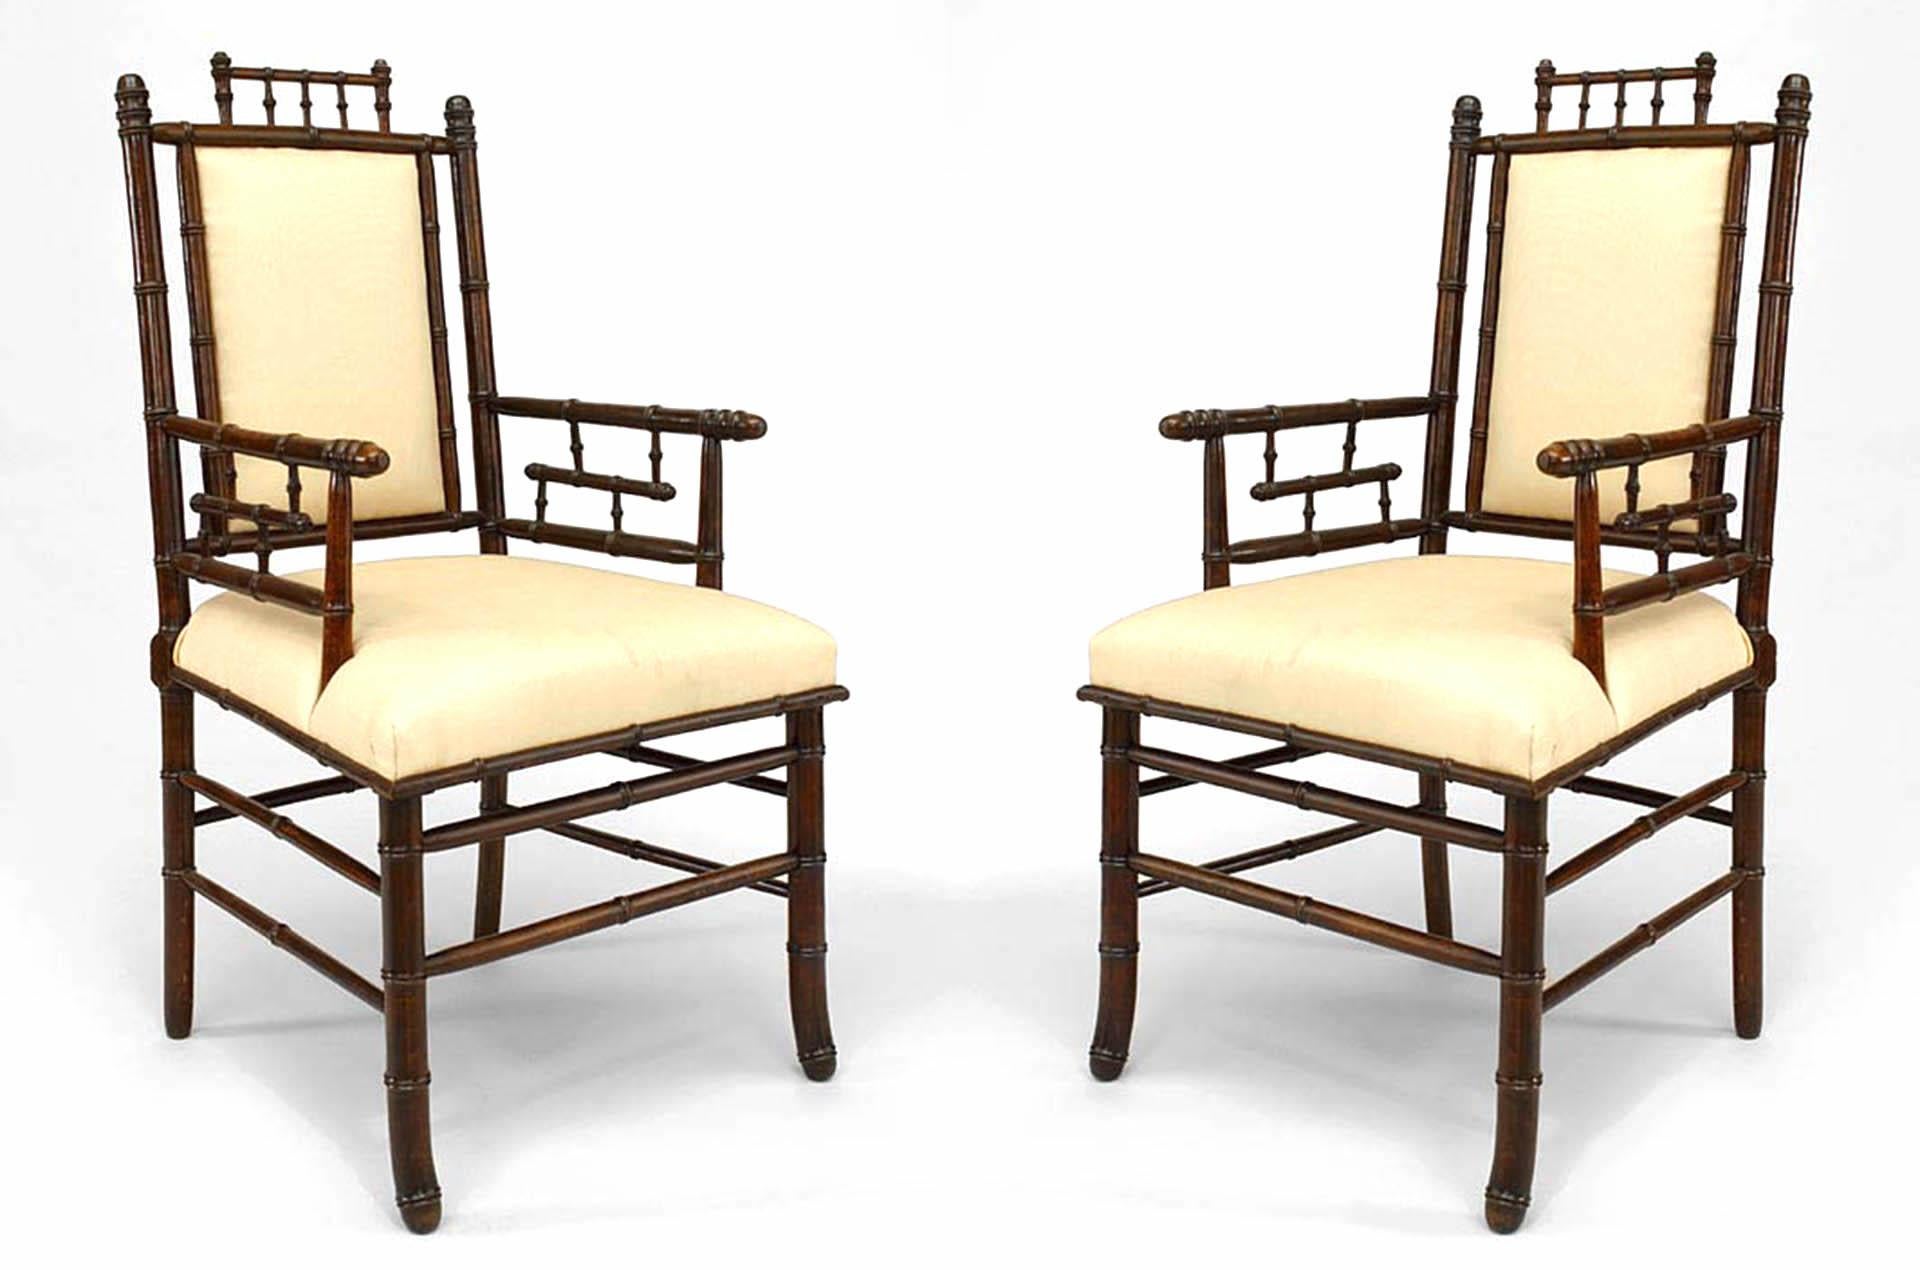 Pair of French Victorian faux bamboo stained walnut armchairs with lattice design sides and beige upholstered seats and back panels (PRICED AS Pair)
